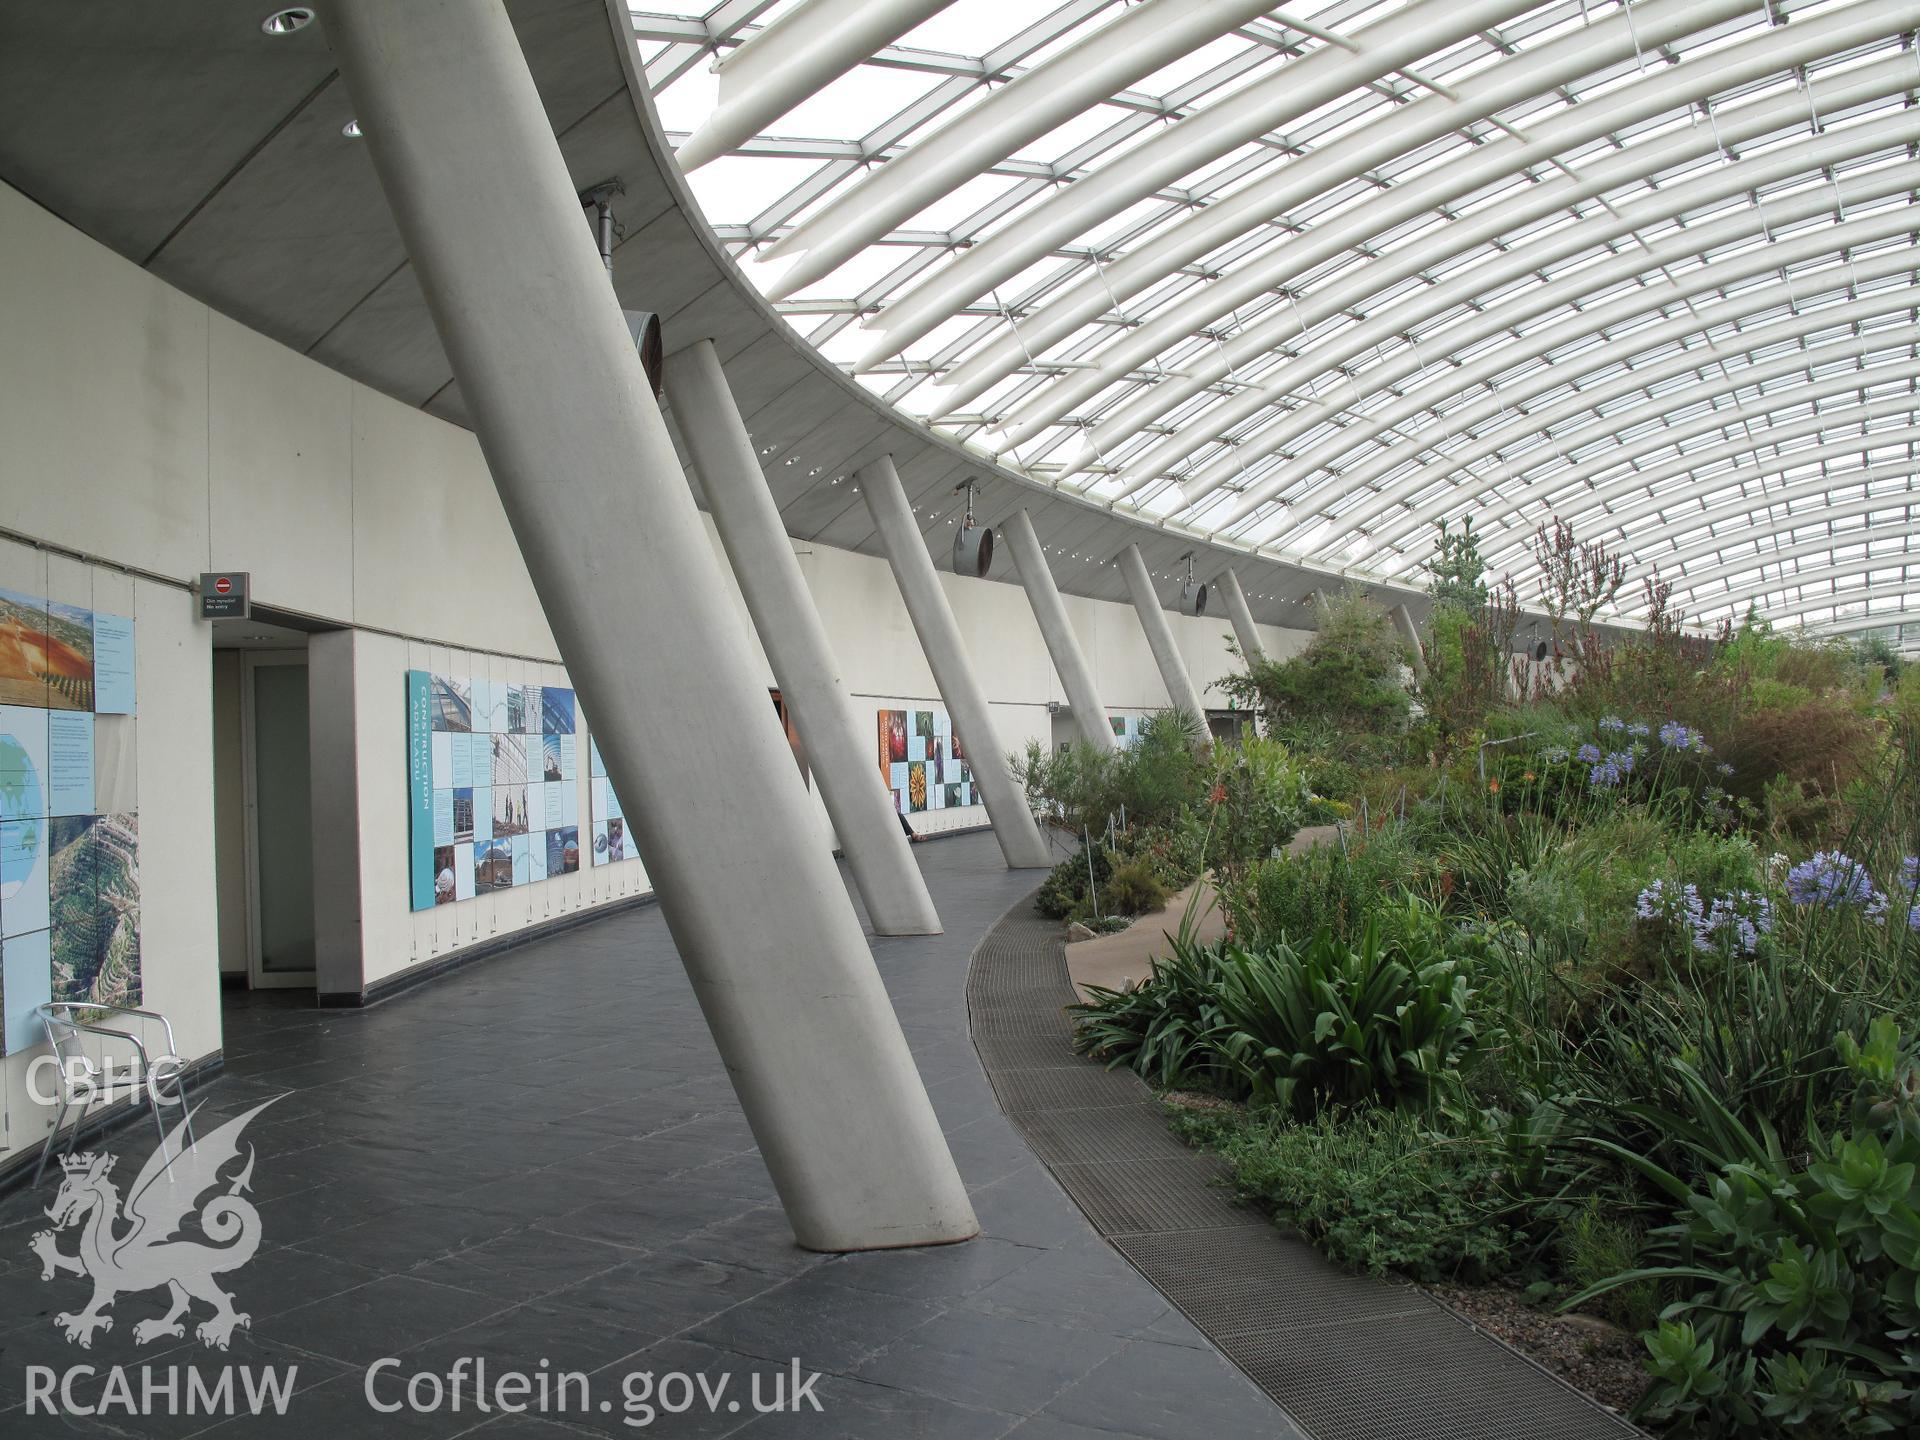 Interior view of the Great Glasshouse, National Botanic Garden of Wales.